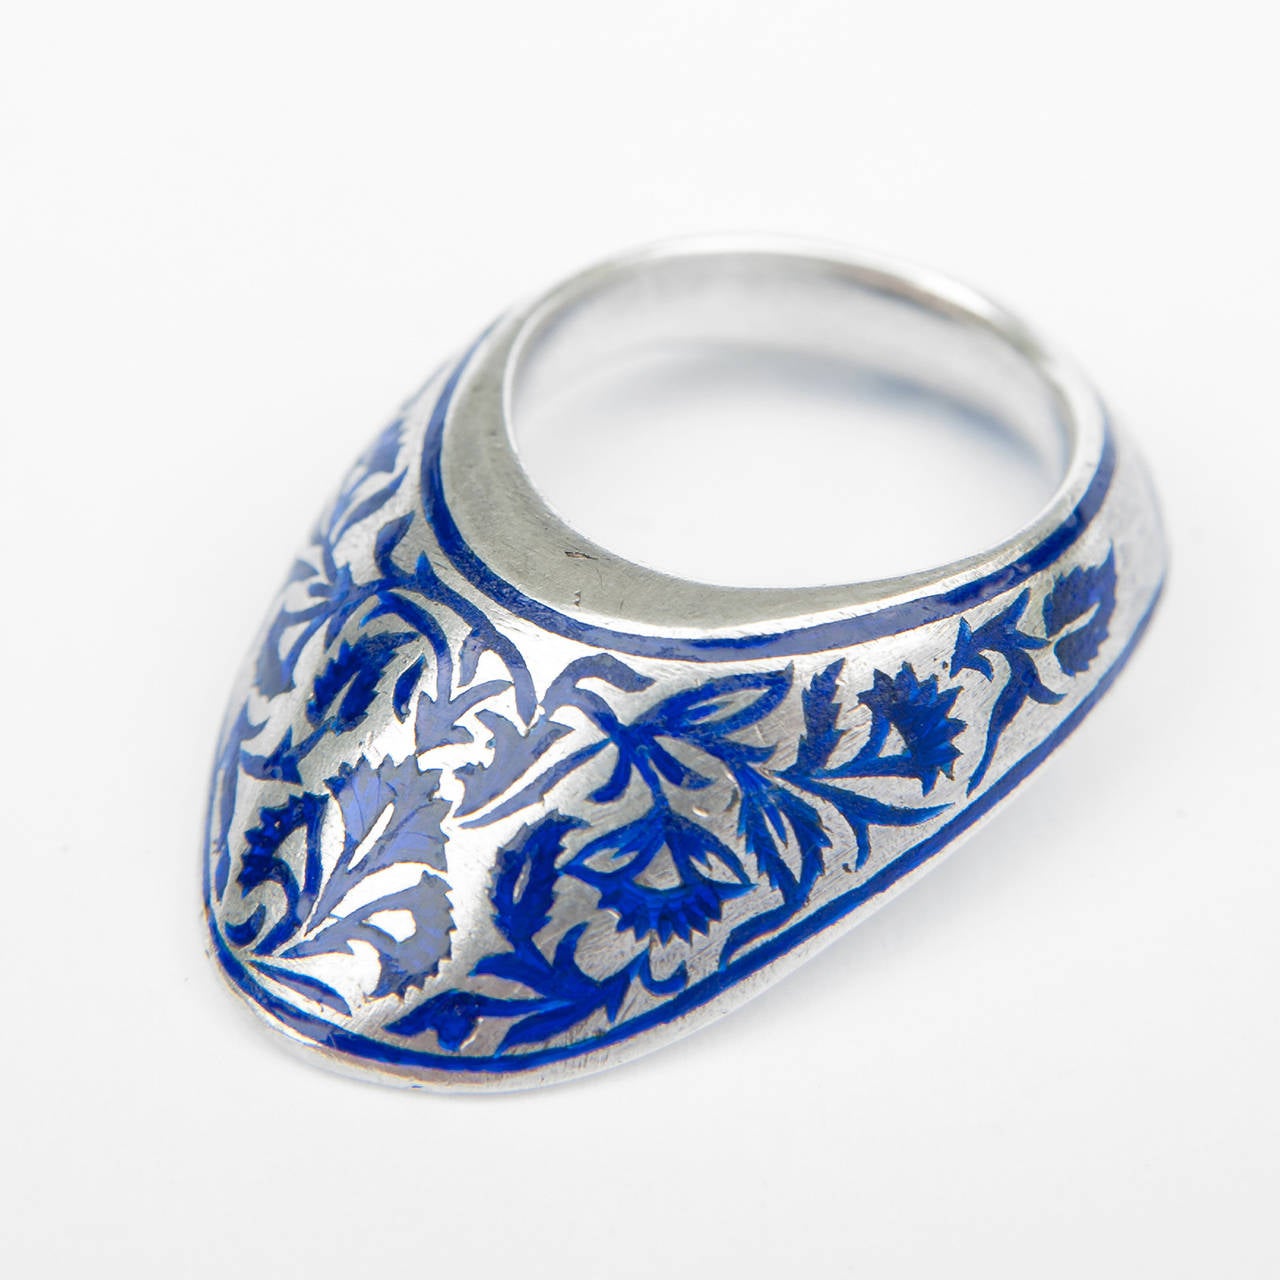 A silver archer’s ring decorated in champlevé technique with gardan – e - talus (peacock blue) enamel in a foliage and floral design to the front, the concave reverse with a similar enamel but different decoration of an open flower with garlands.